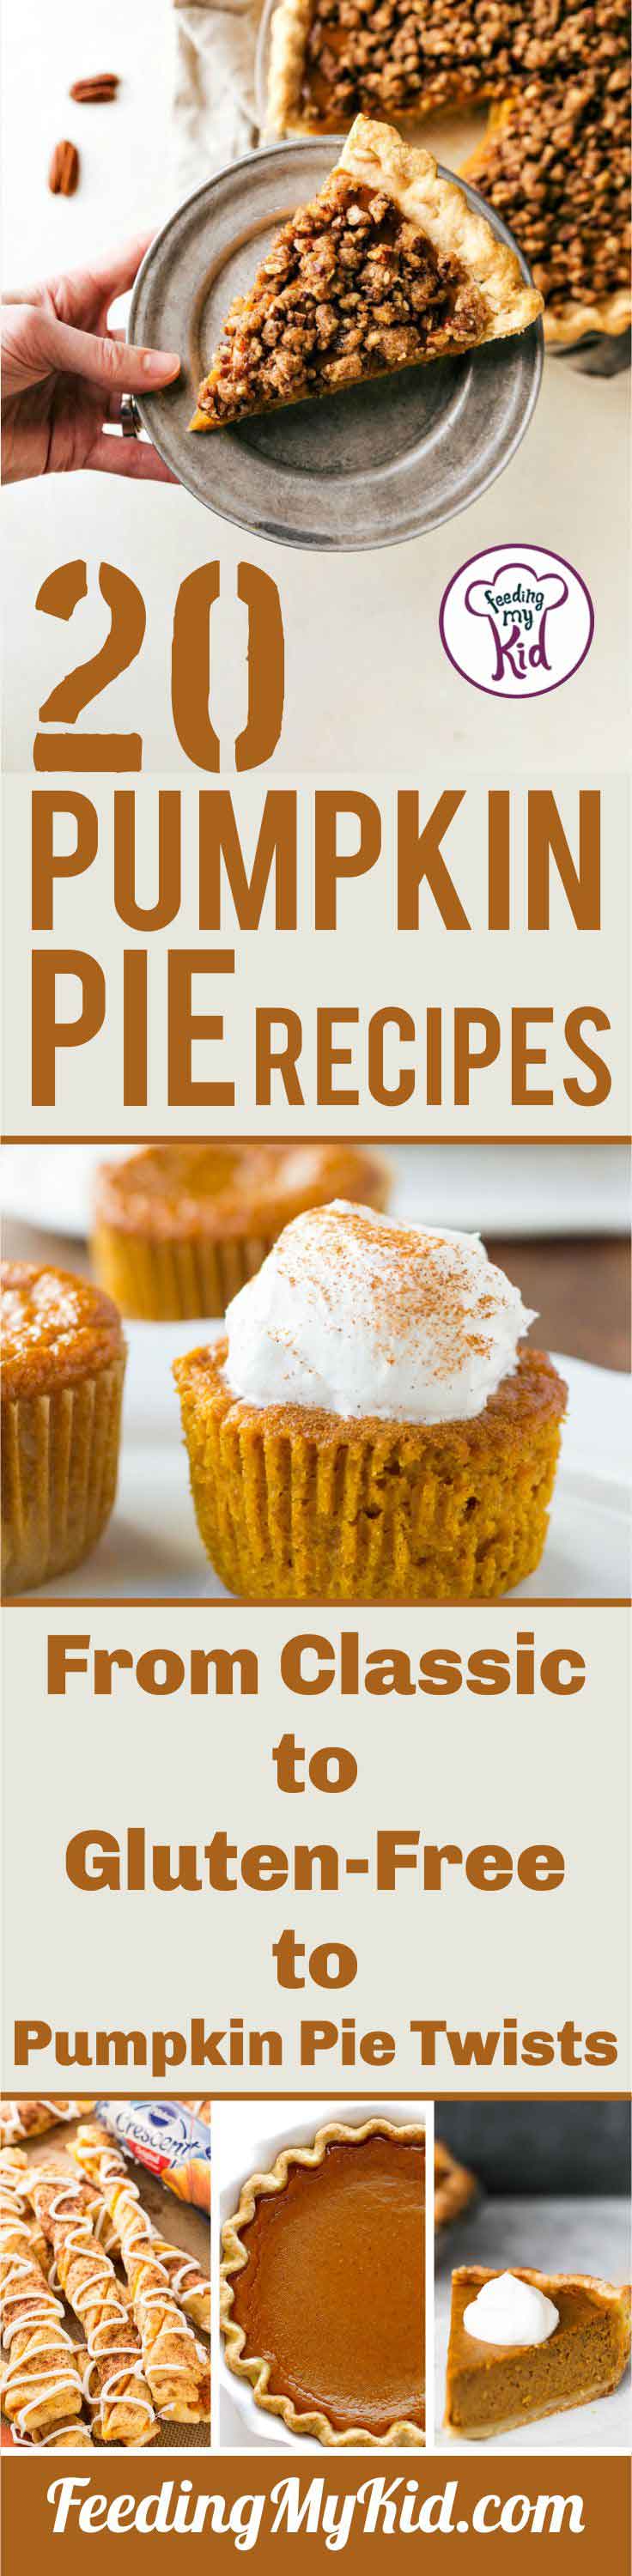 Pumpkin pie is one of those classic Fall desserts. I can eat it all year long! These pumpkin pie recipe varieties mix it up for year-round enjoyment.